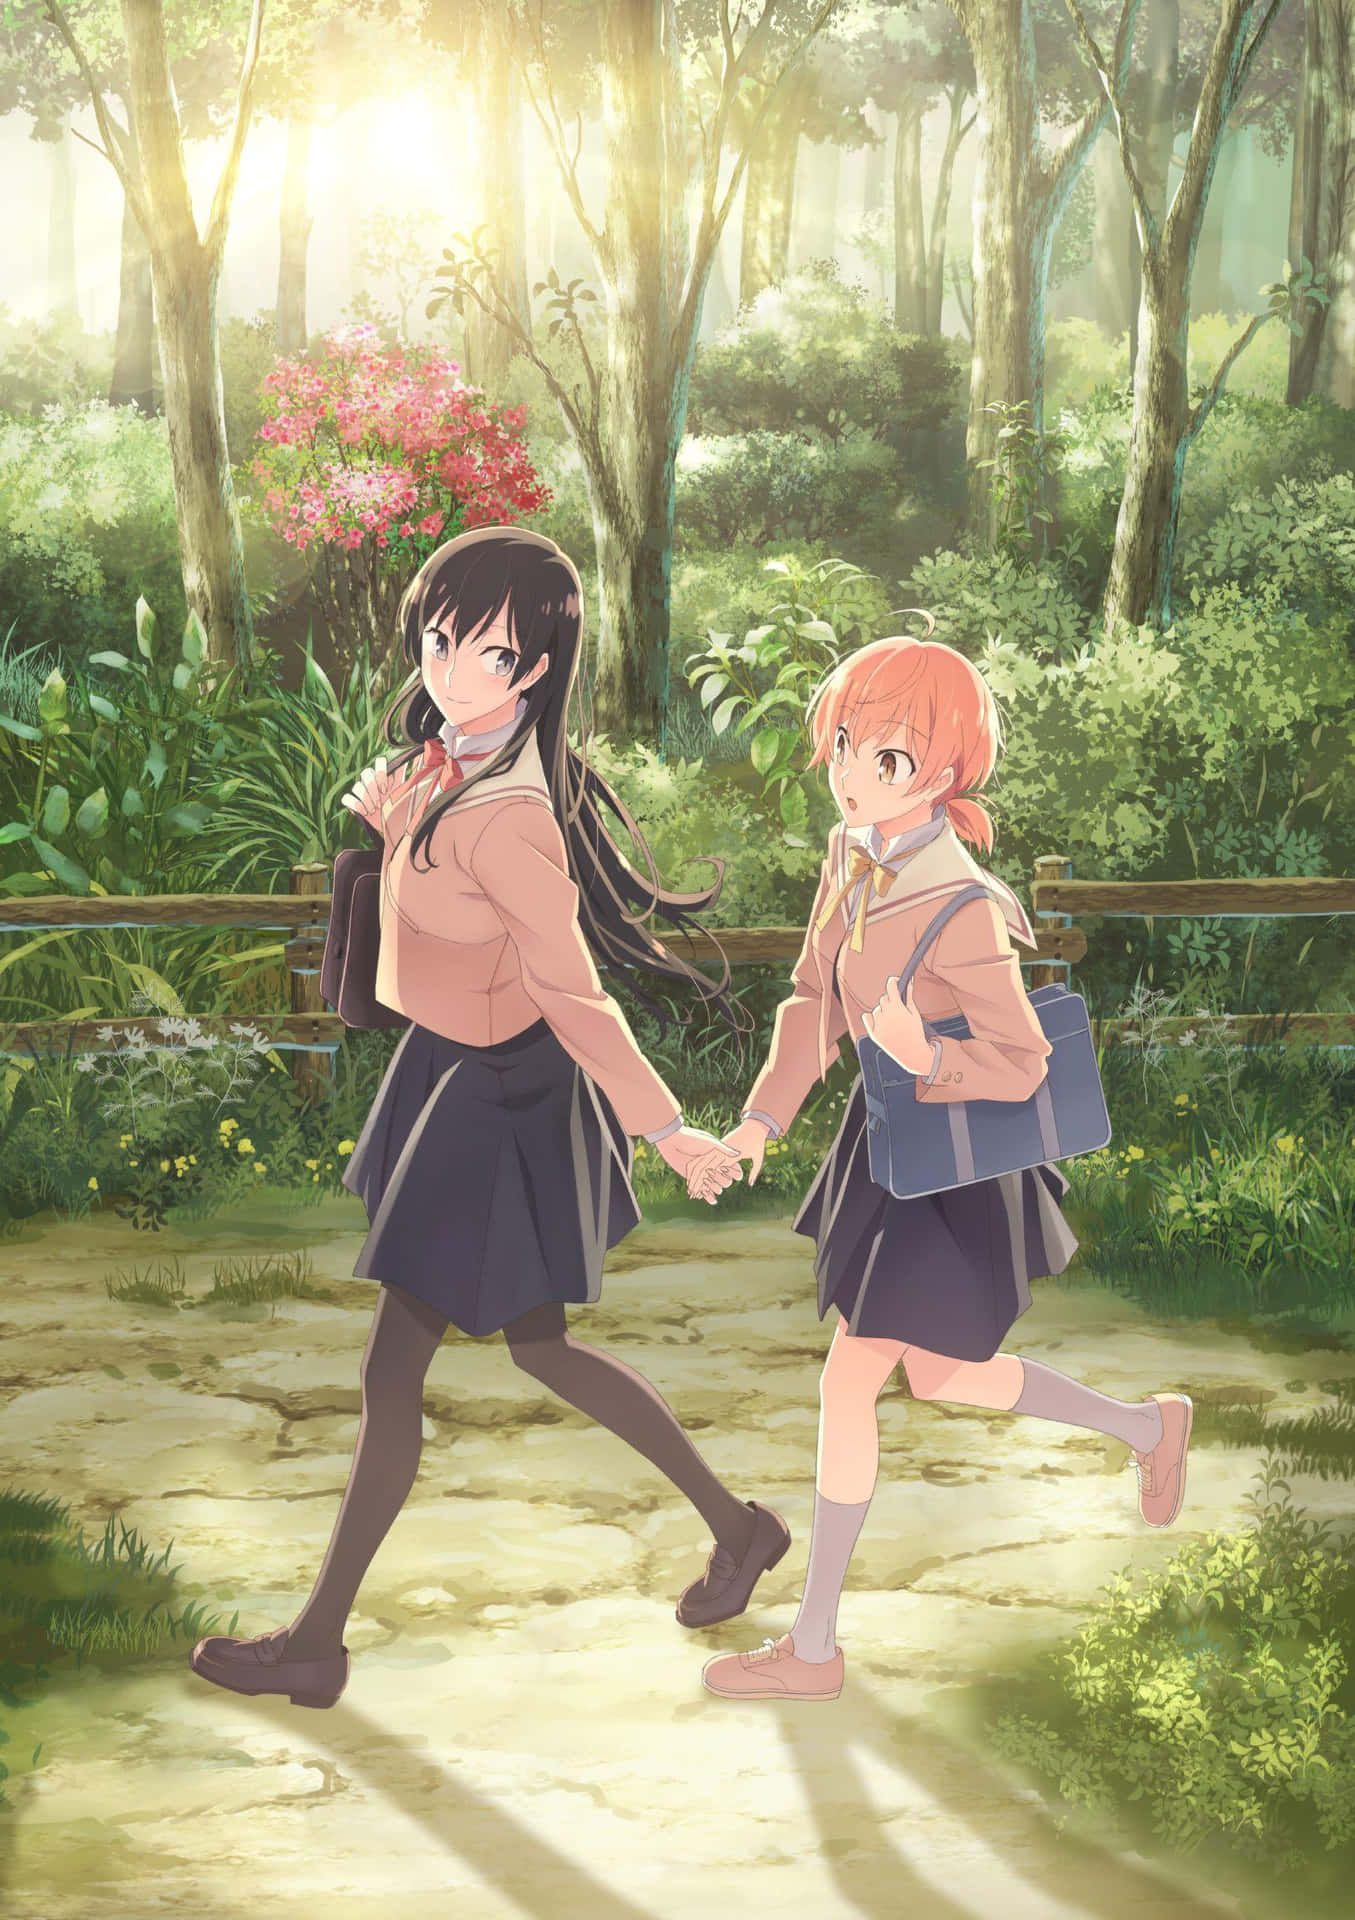 Lesbiskanime Bloom Into You Yuu Touko. (note: There Is No Context Given In The Prompt, So I've Simply Translated The Phrase As Provided.) Wallpaper